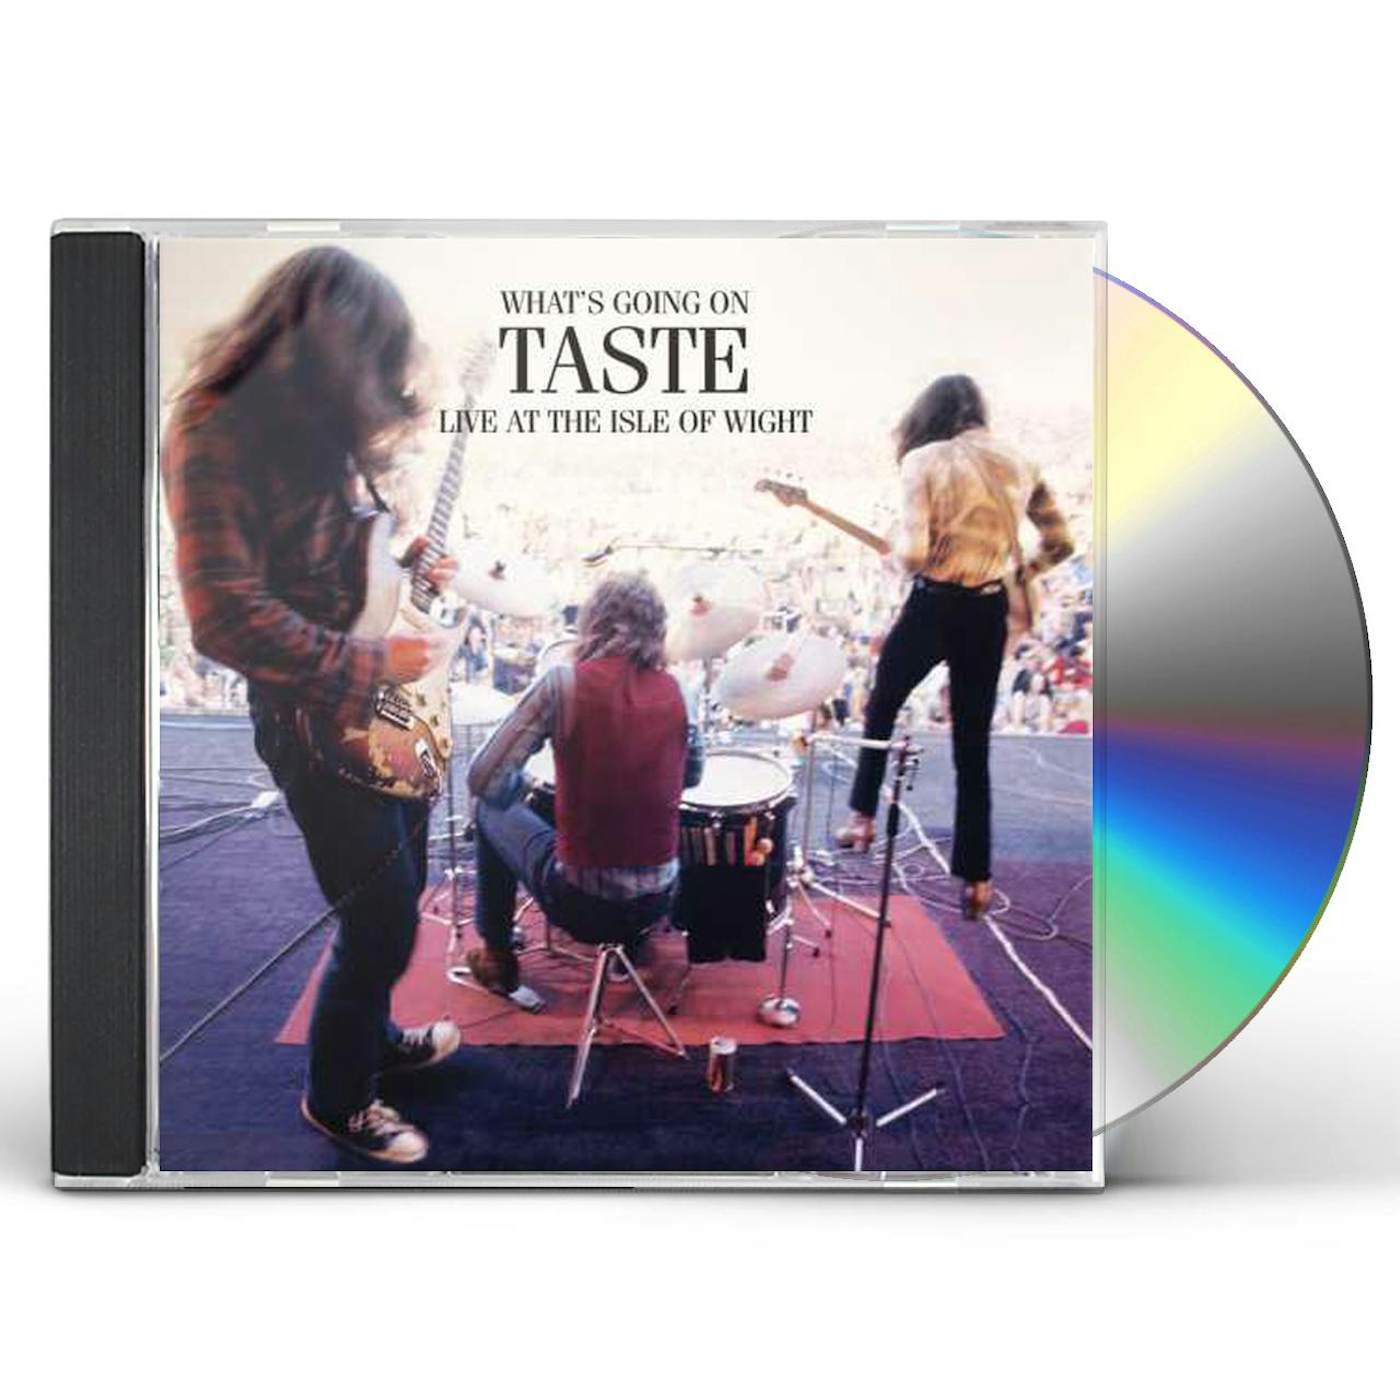 WHAT'S GOING ON TASTE LIVE AT THE ISLE OF WIGHT CD